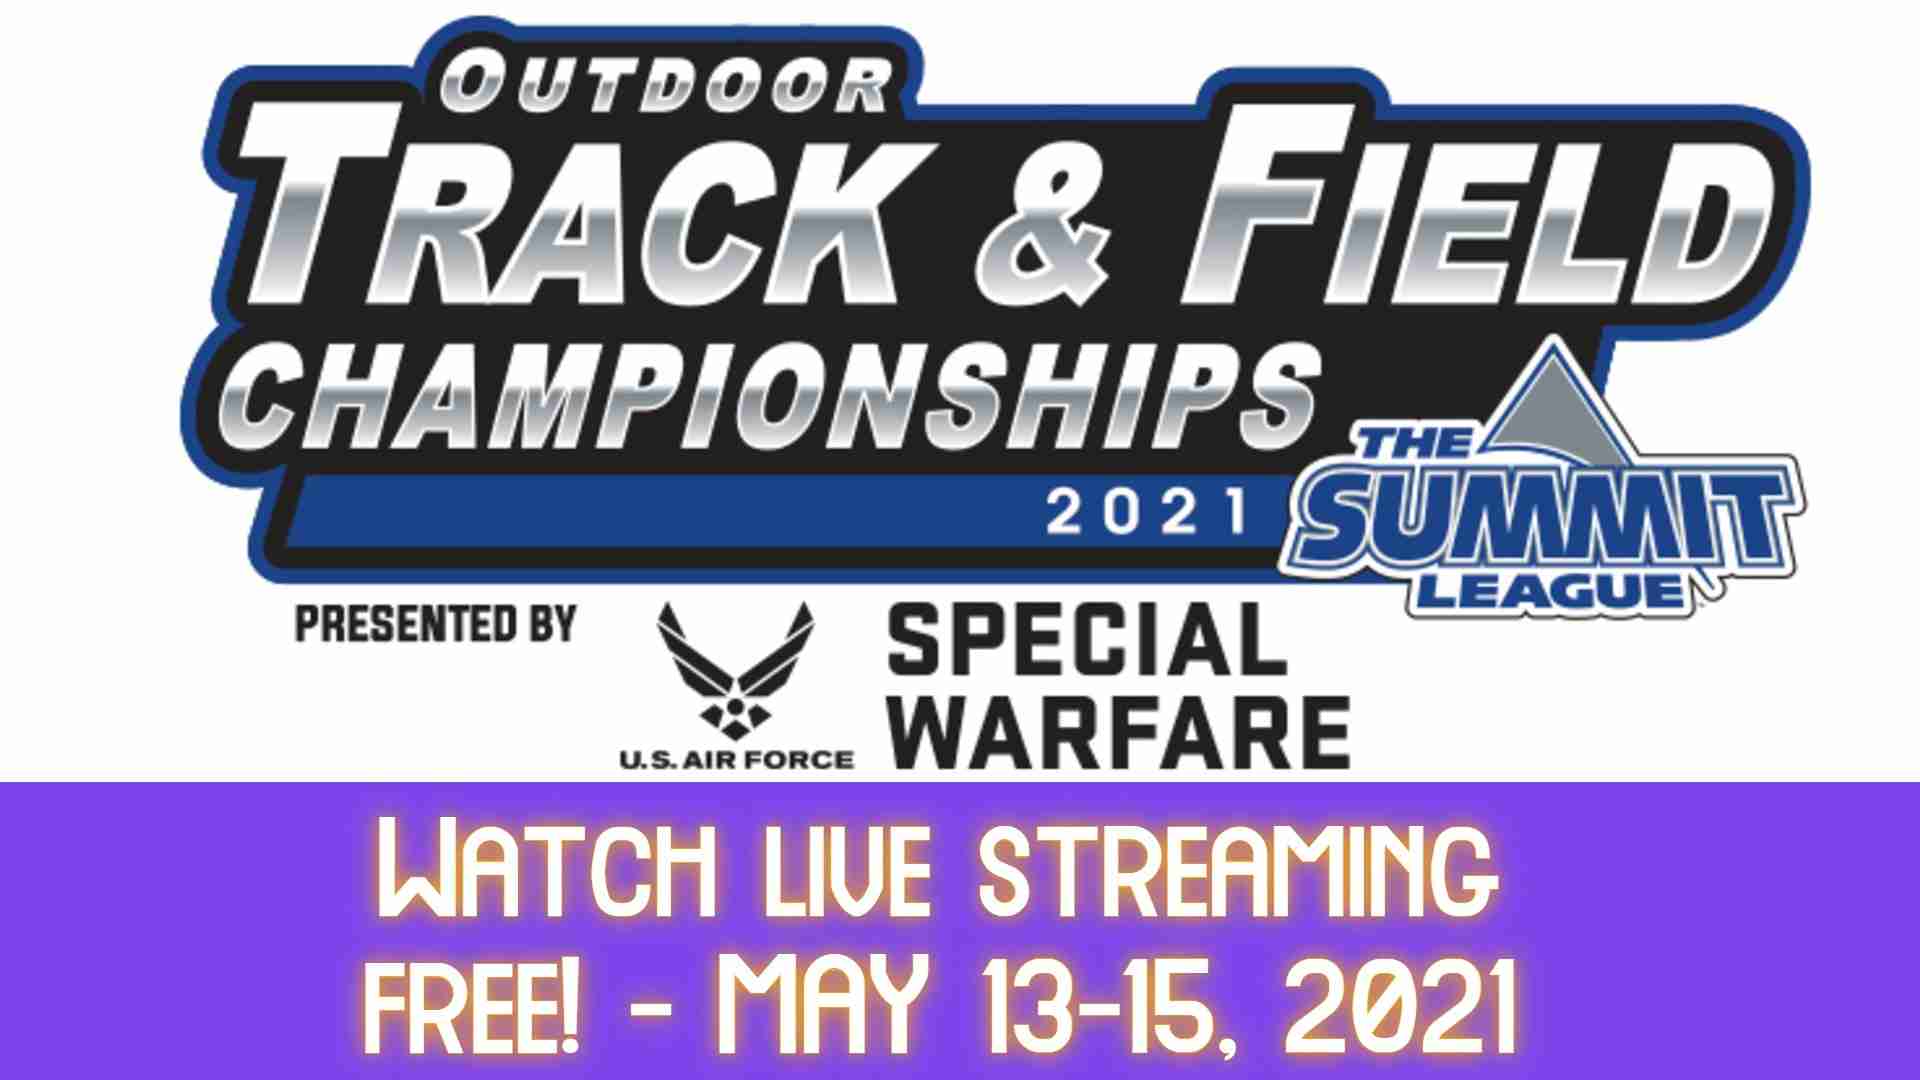 How to watch 2021 Summit League Outdoor Championships Free!